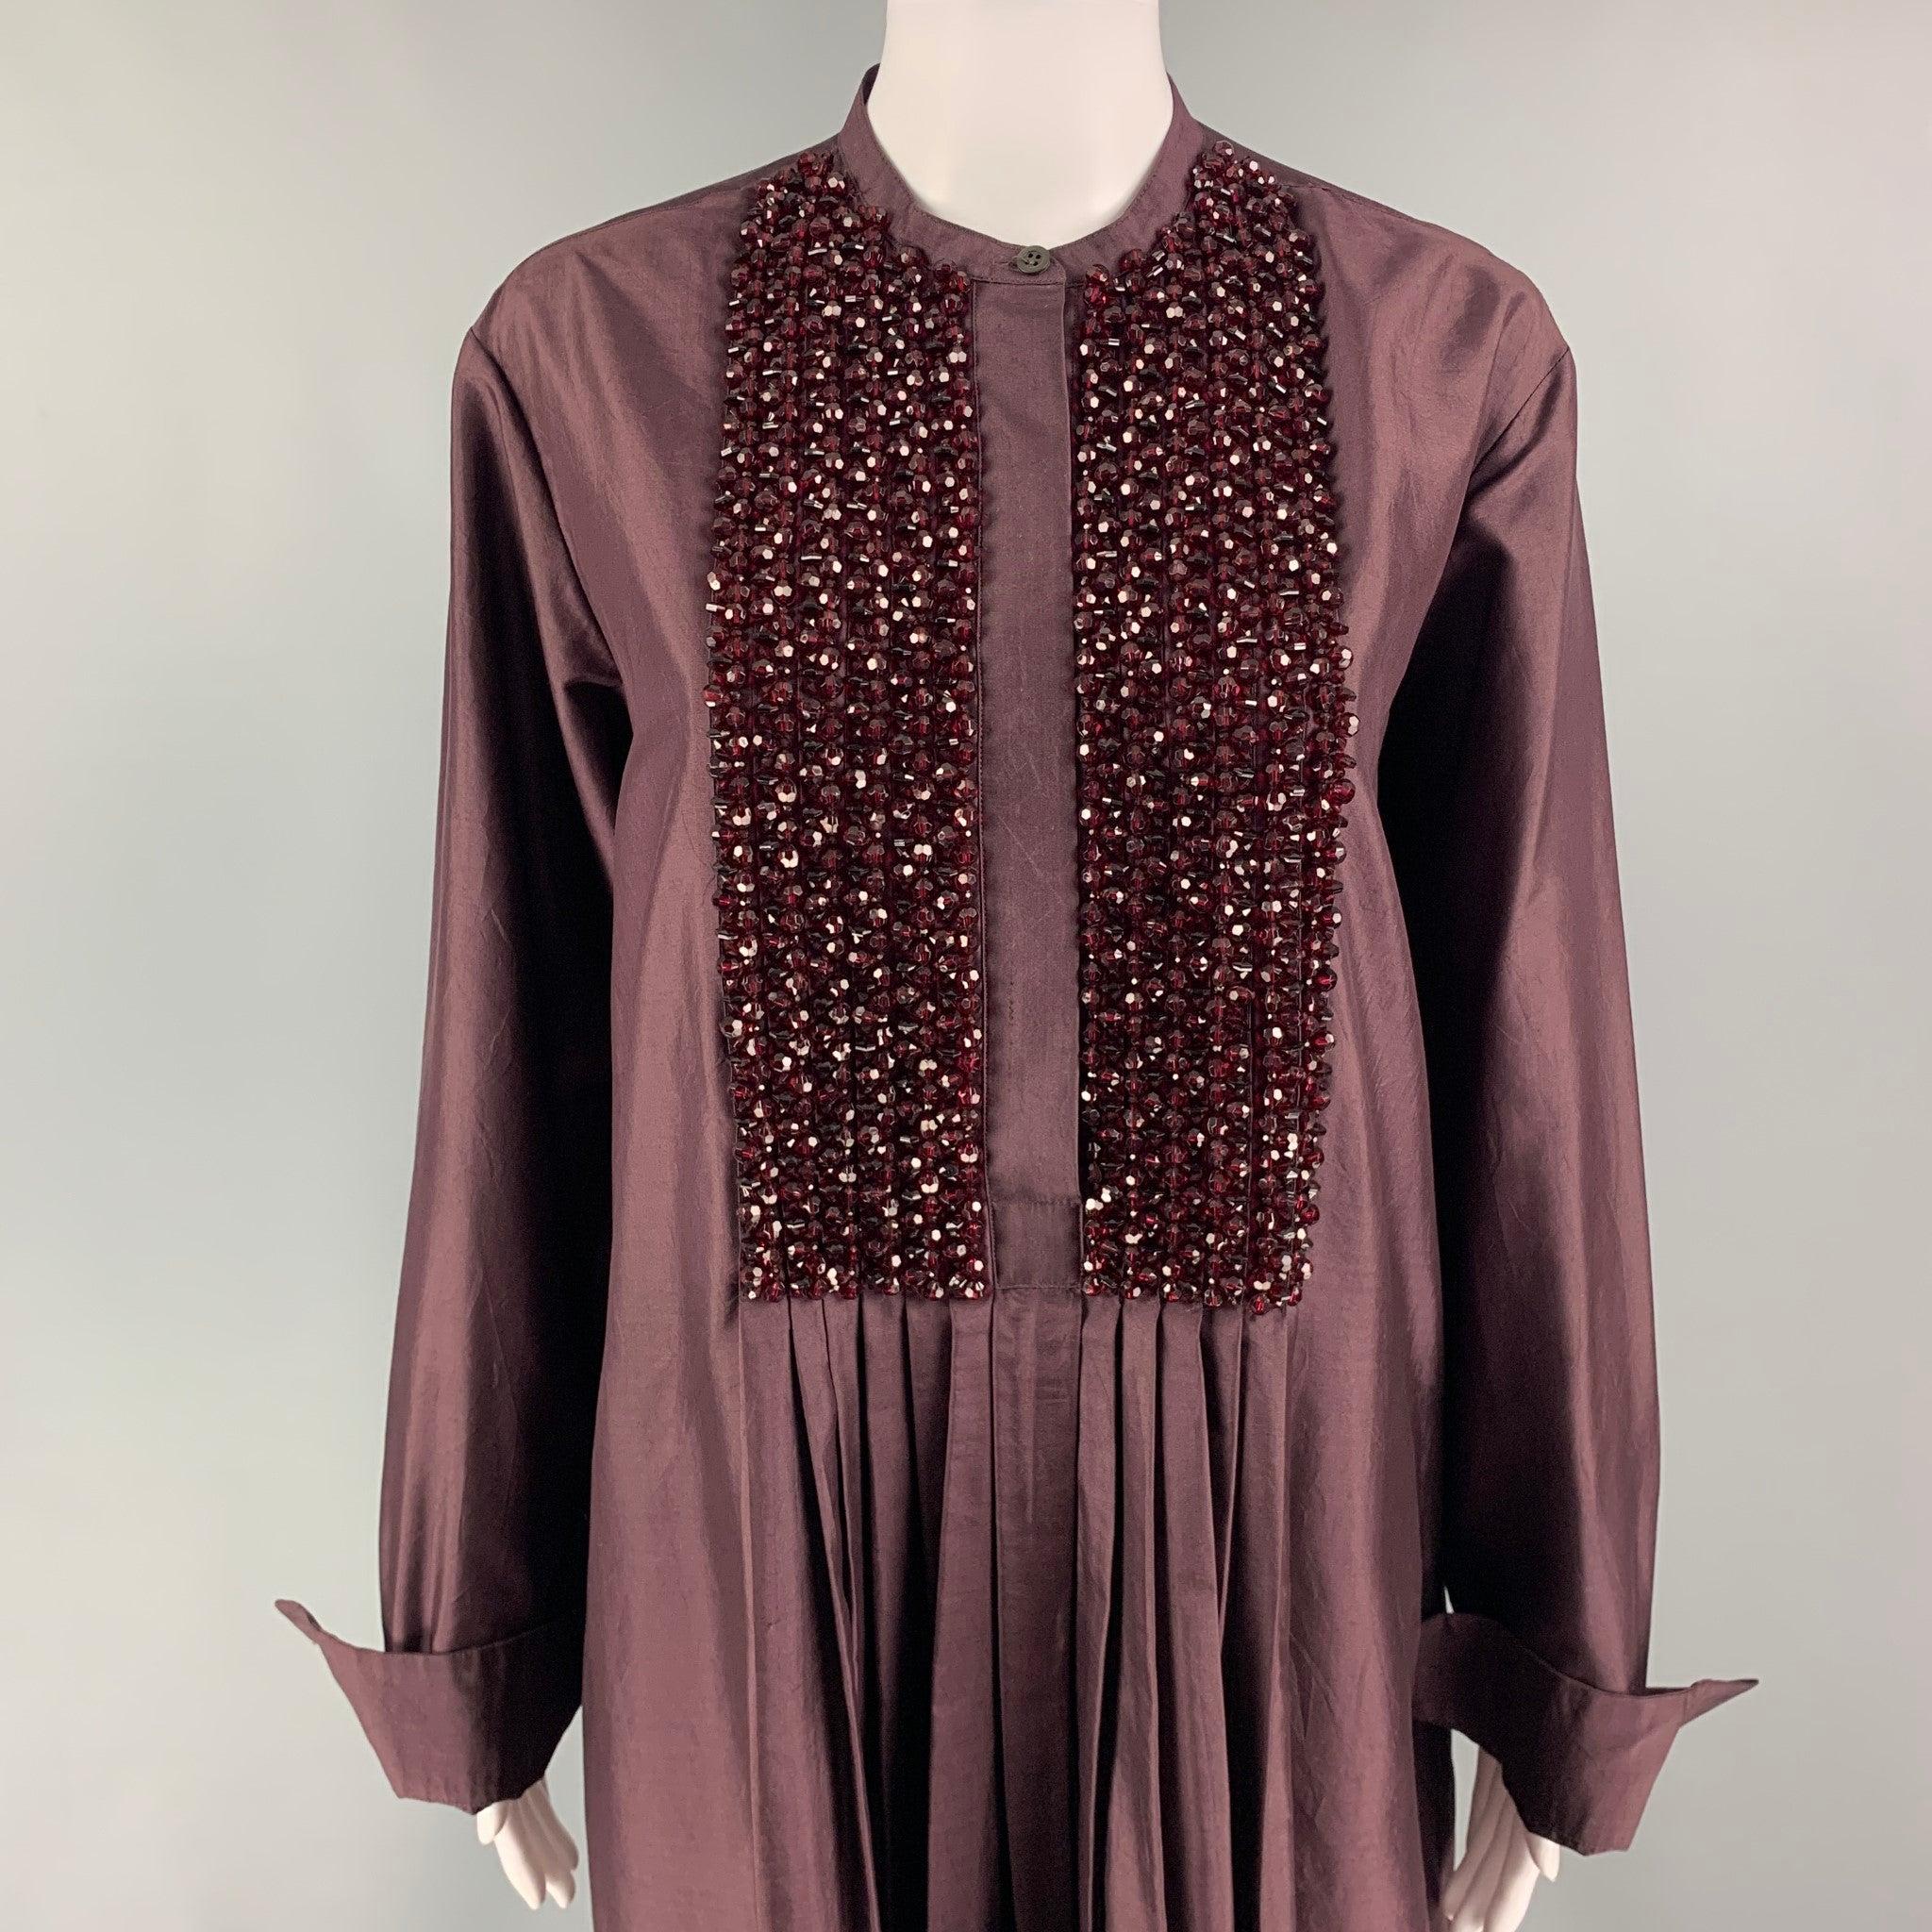 DRIES VAN NOTEN dress comes in a burgundy silk featuring a tunic style, pleated, beaded panel, slit pockets, and a front hidden placket closure.
Excellent
Pre-Owned Condition. 

Marked:   36 

Measurements: 
 
Shoulder: 17 inches Bust:
44 inHip: 46